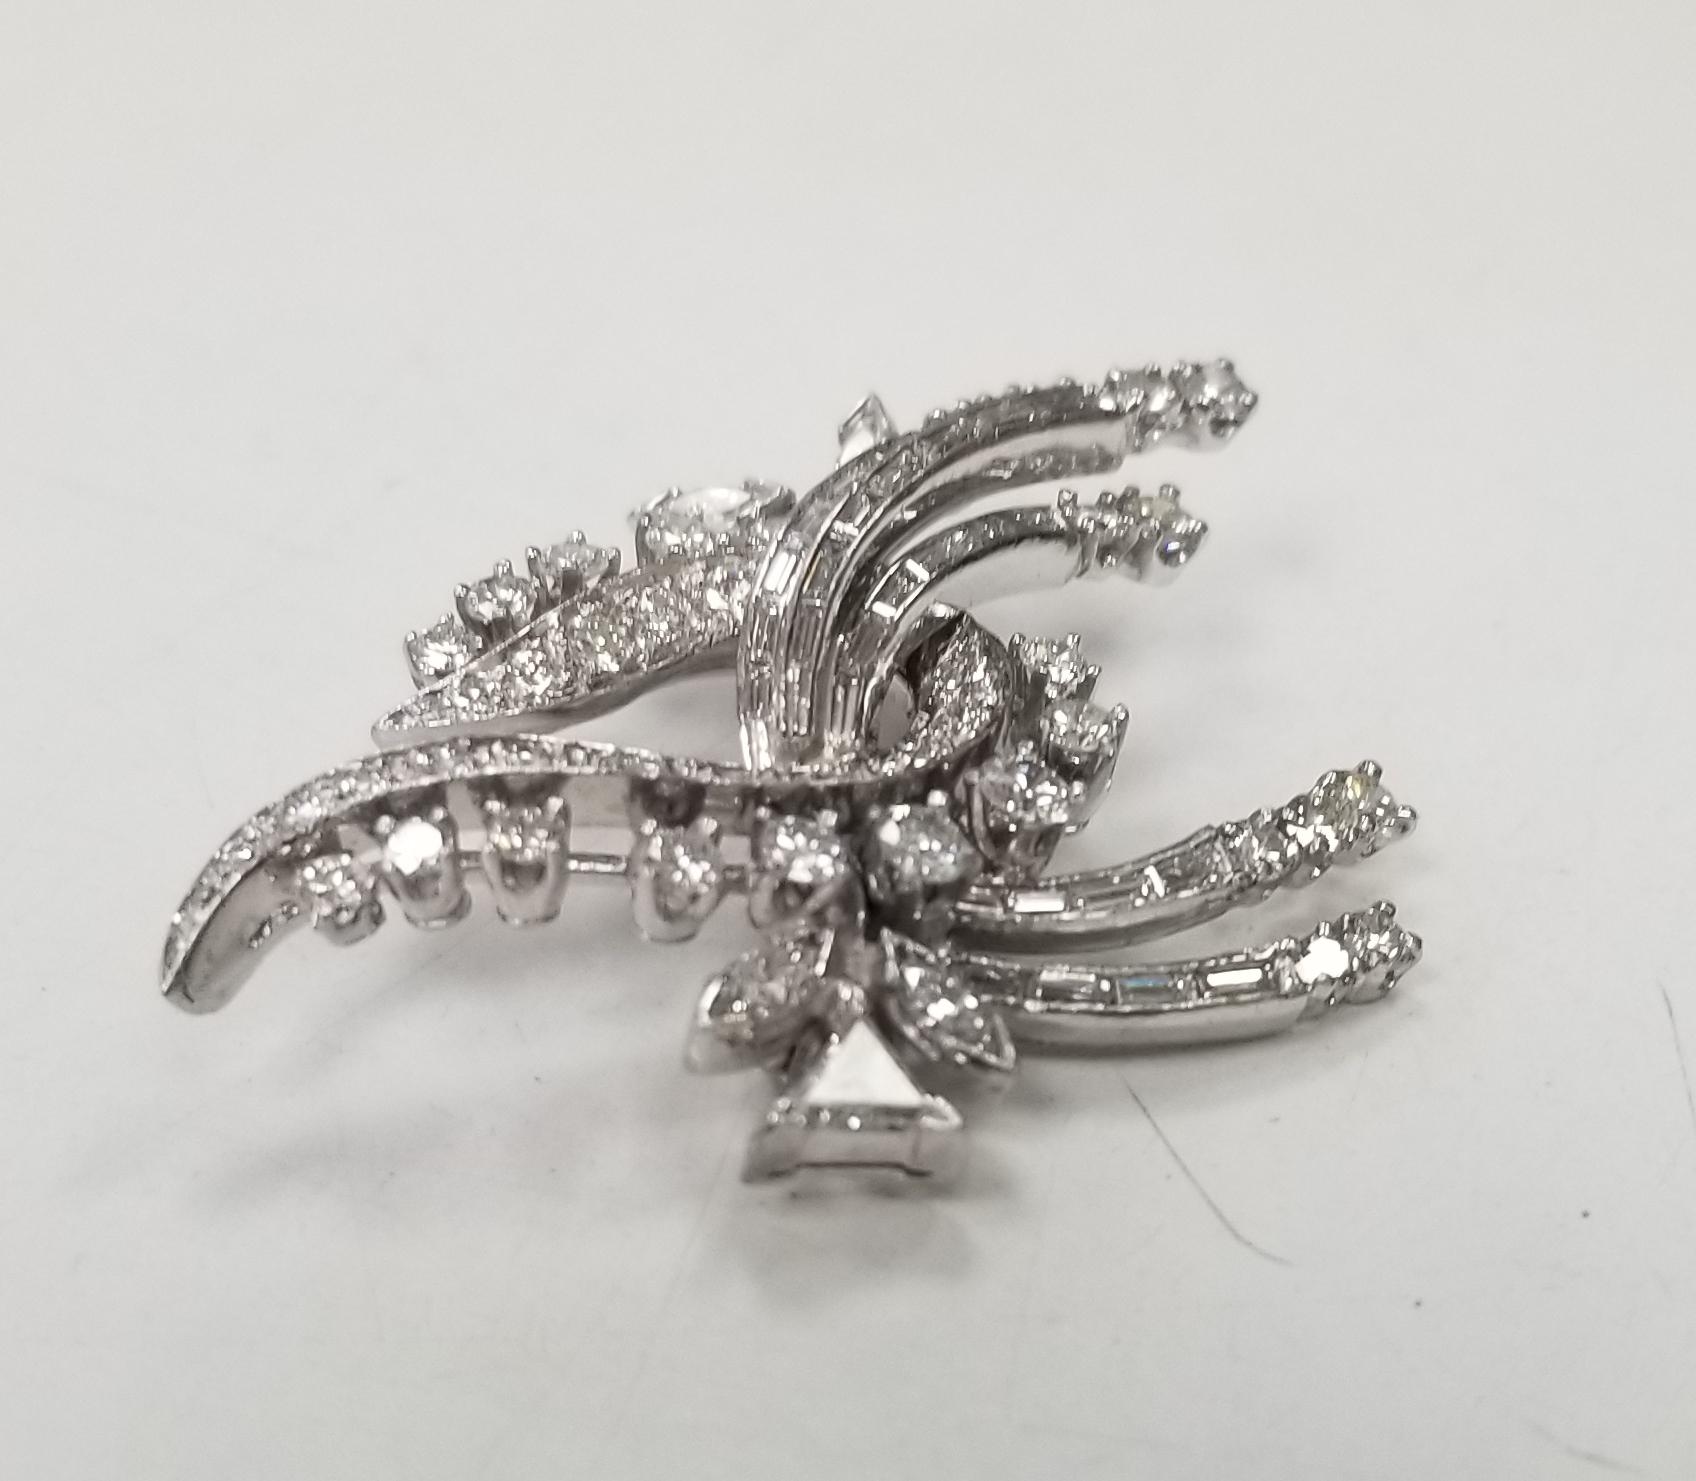 *Motivated to Sell – Please make a Fair Offer*
Total Carat Weight: 1.55
Diamond Clarity Grade:VS
Type:Brooch
Antique:Yes
Main Stone Color:White/Colorless
Vintage:Yes
Main Stone:Diamond
Main Stone Creation:Natural
Occasion:Anniversary, Birthday,